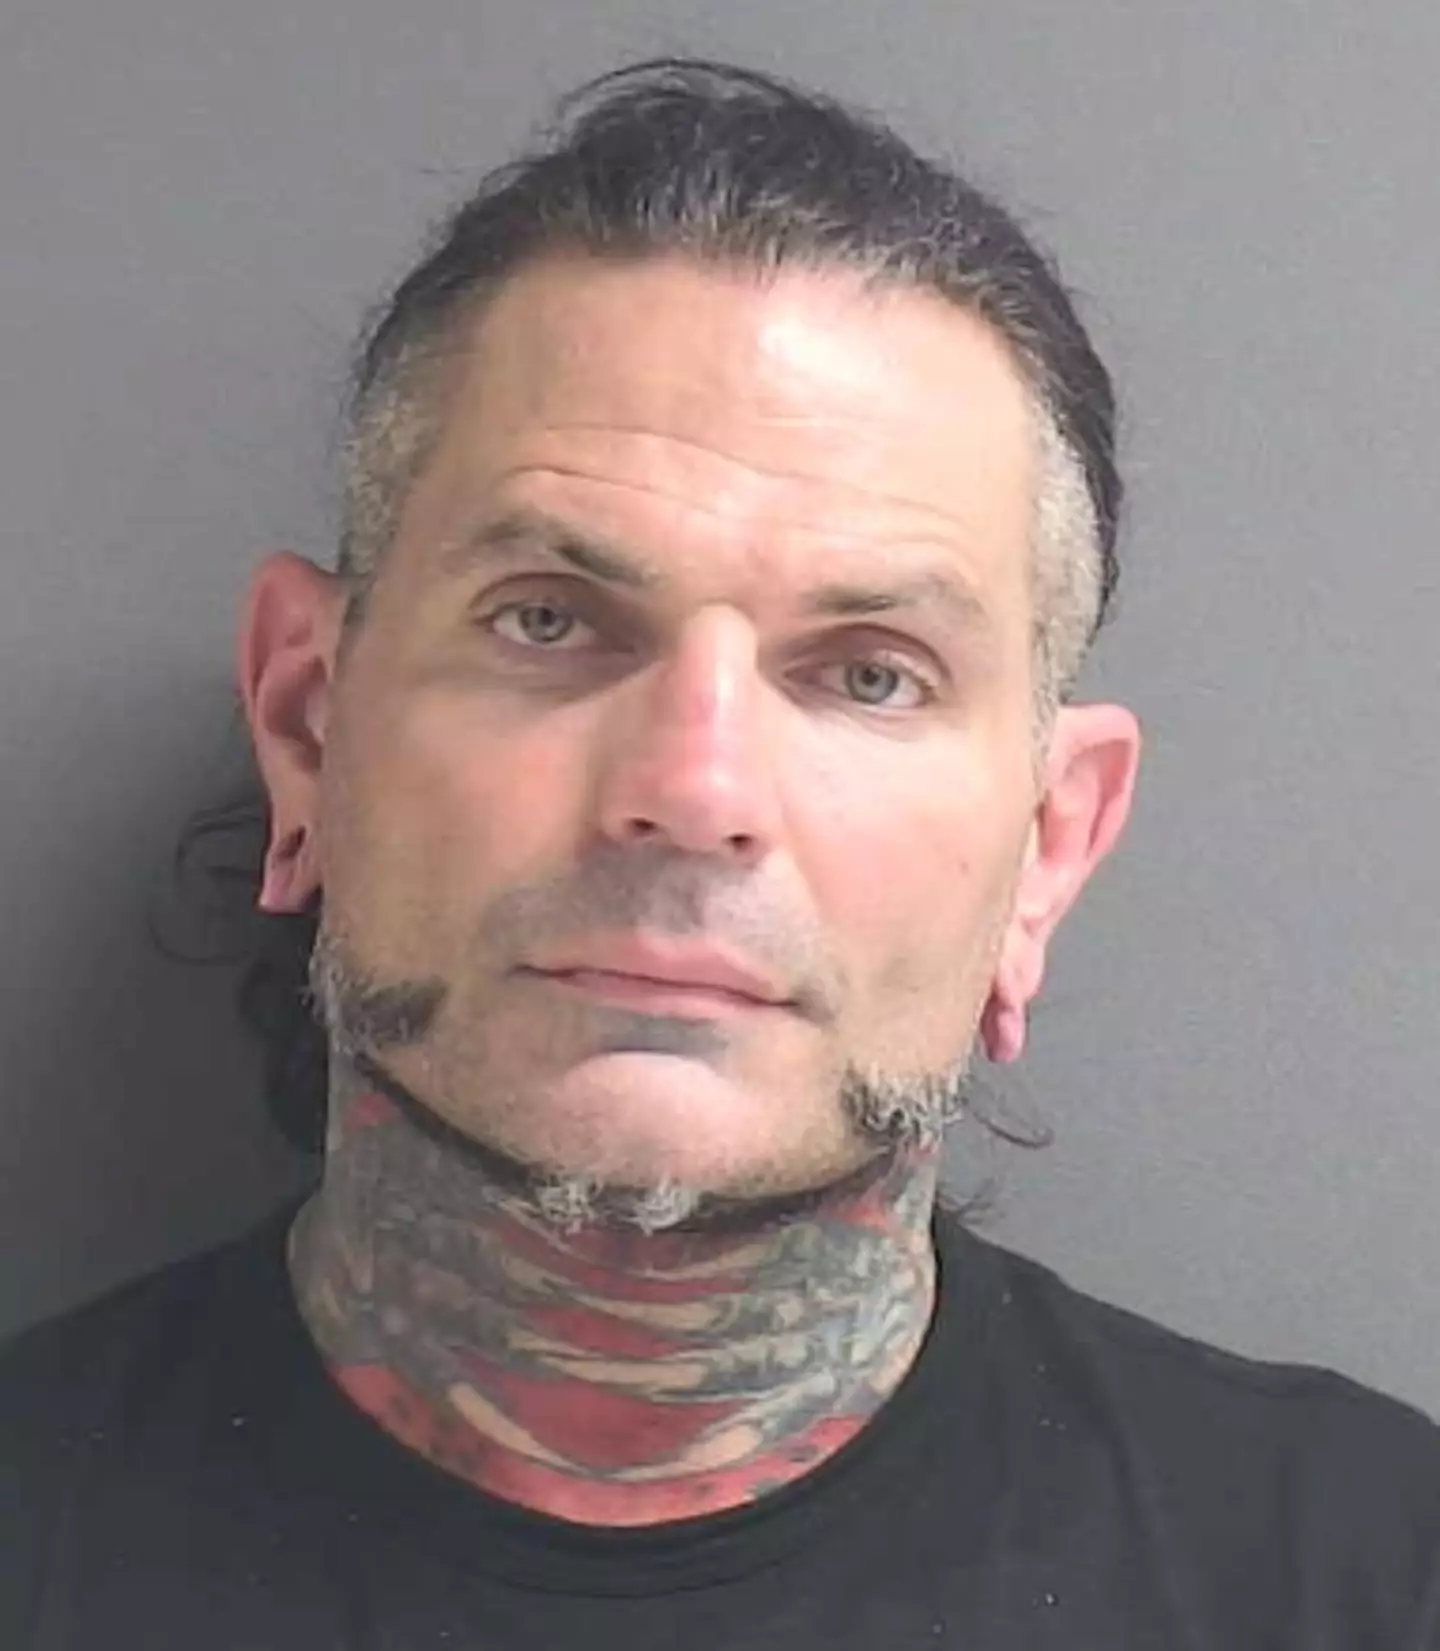 Jeff Hardy was arrested in Florida.